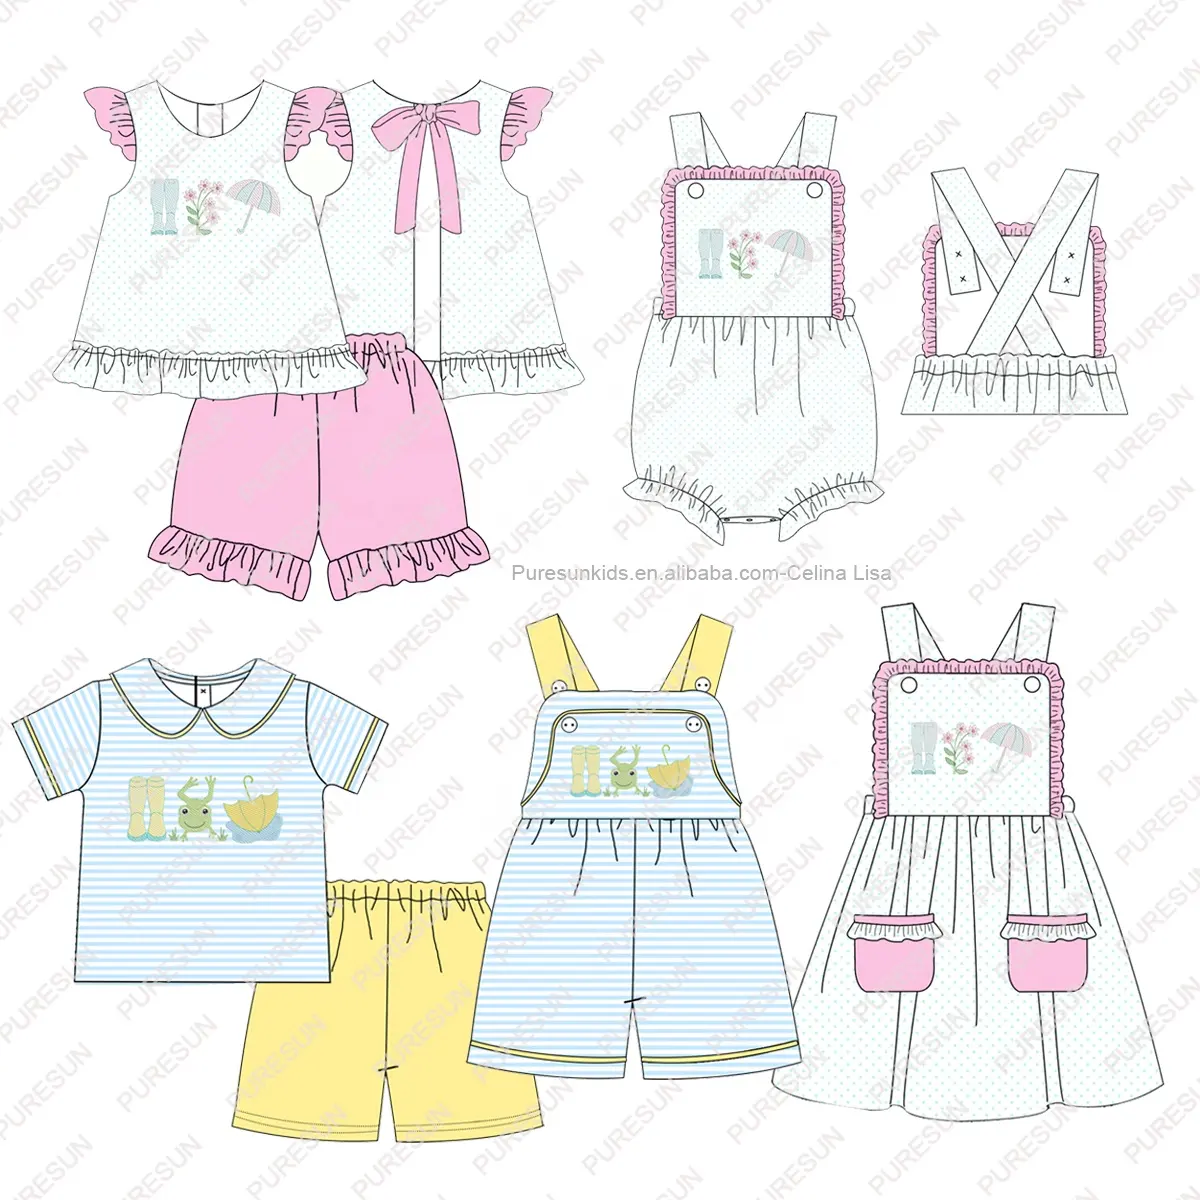 2023 Hot sale girls clothing sets fashion style baby girl outfit boots embroidery wholesale summer baby girl outfit